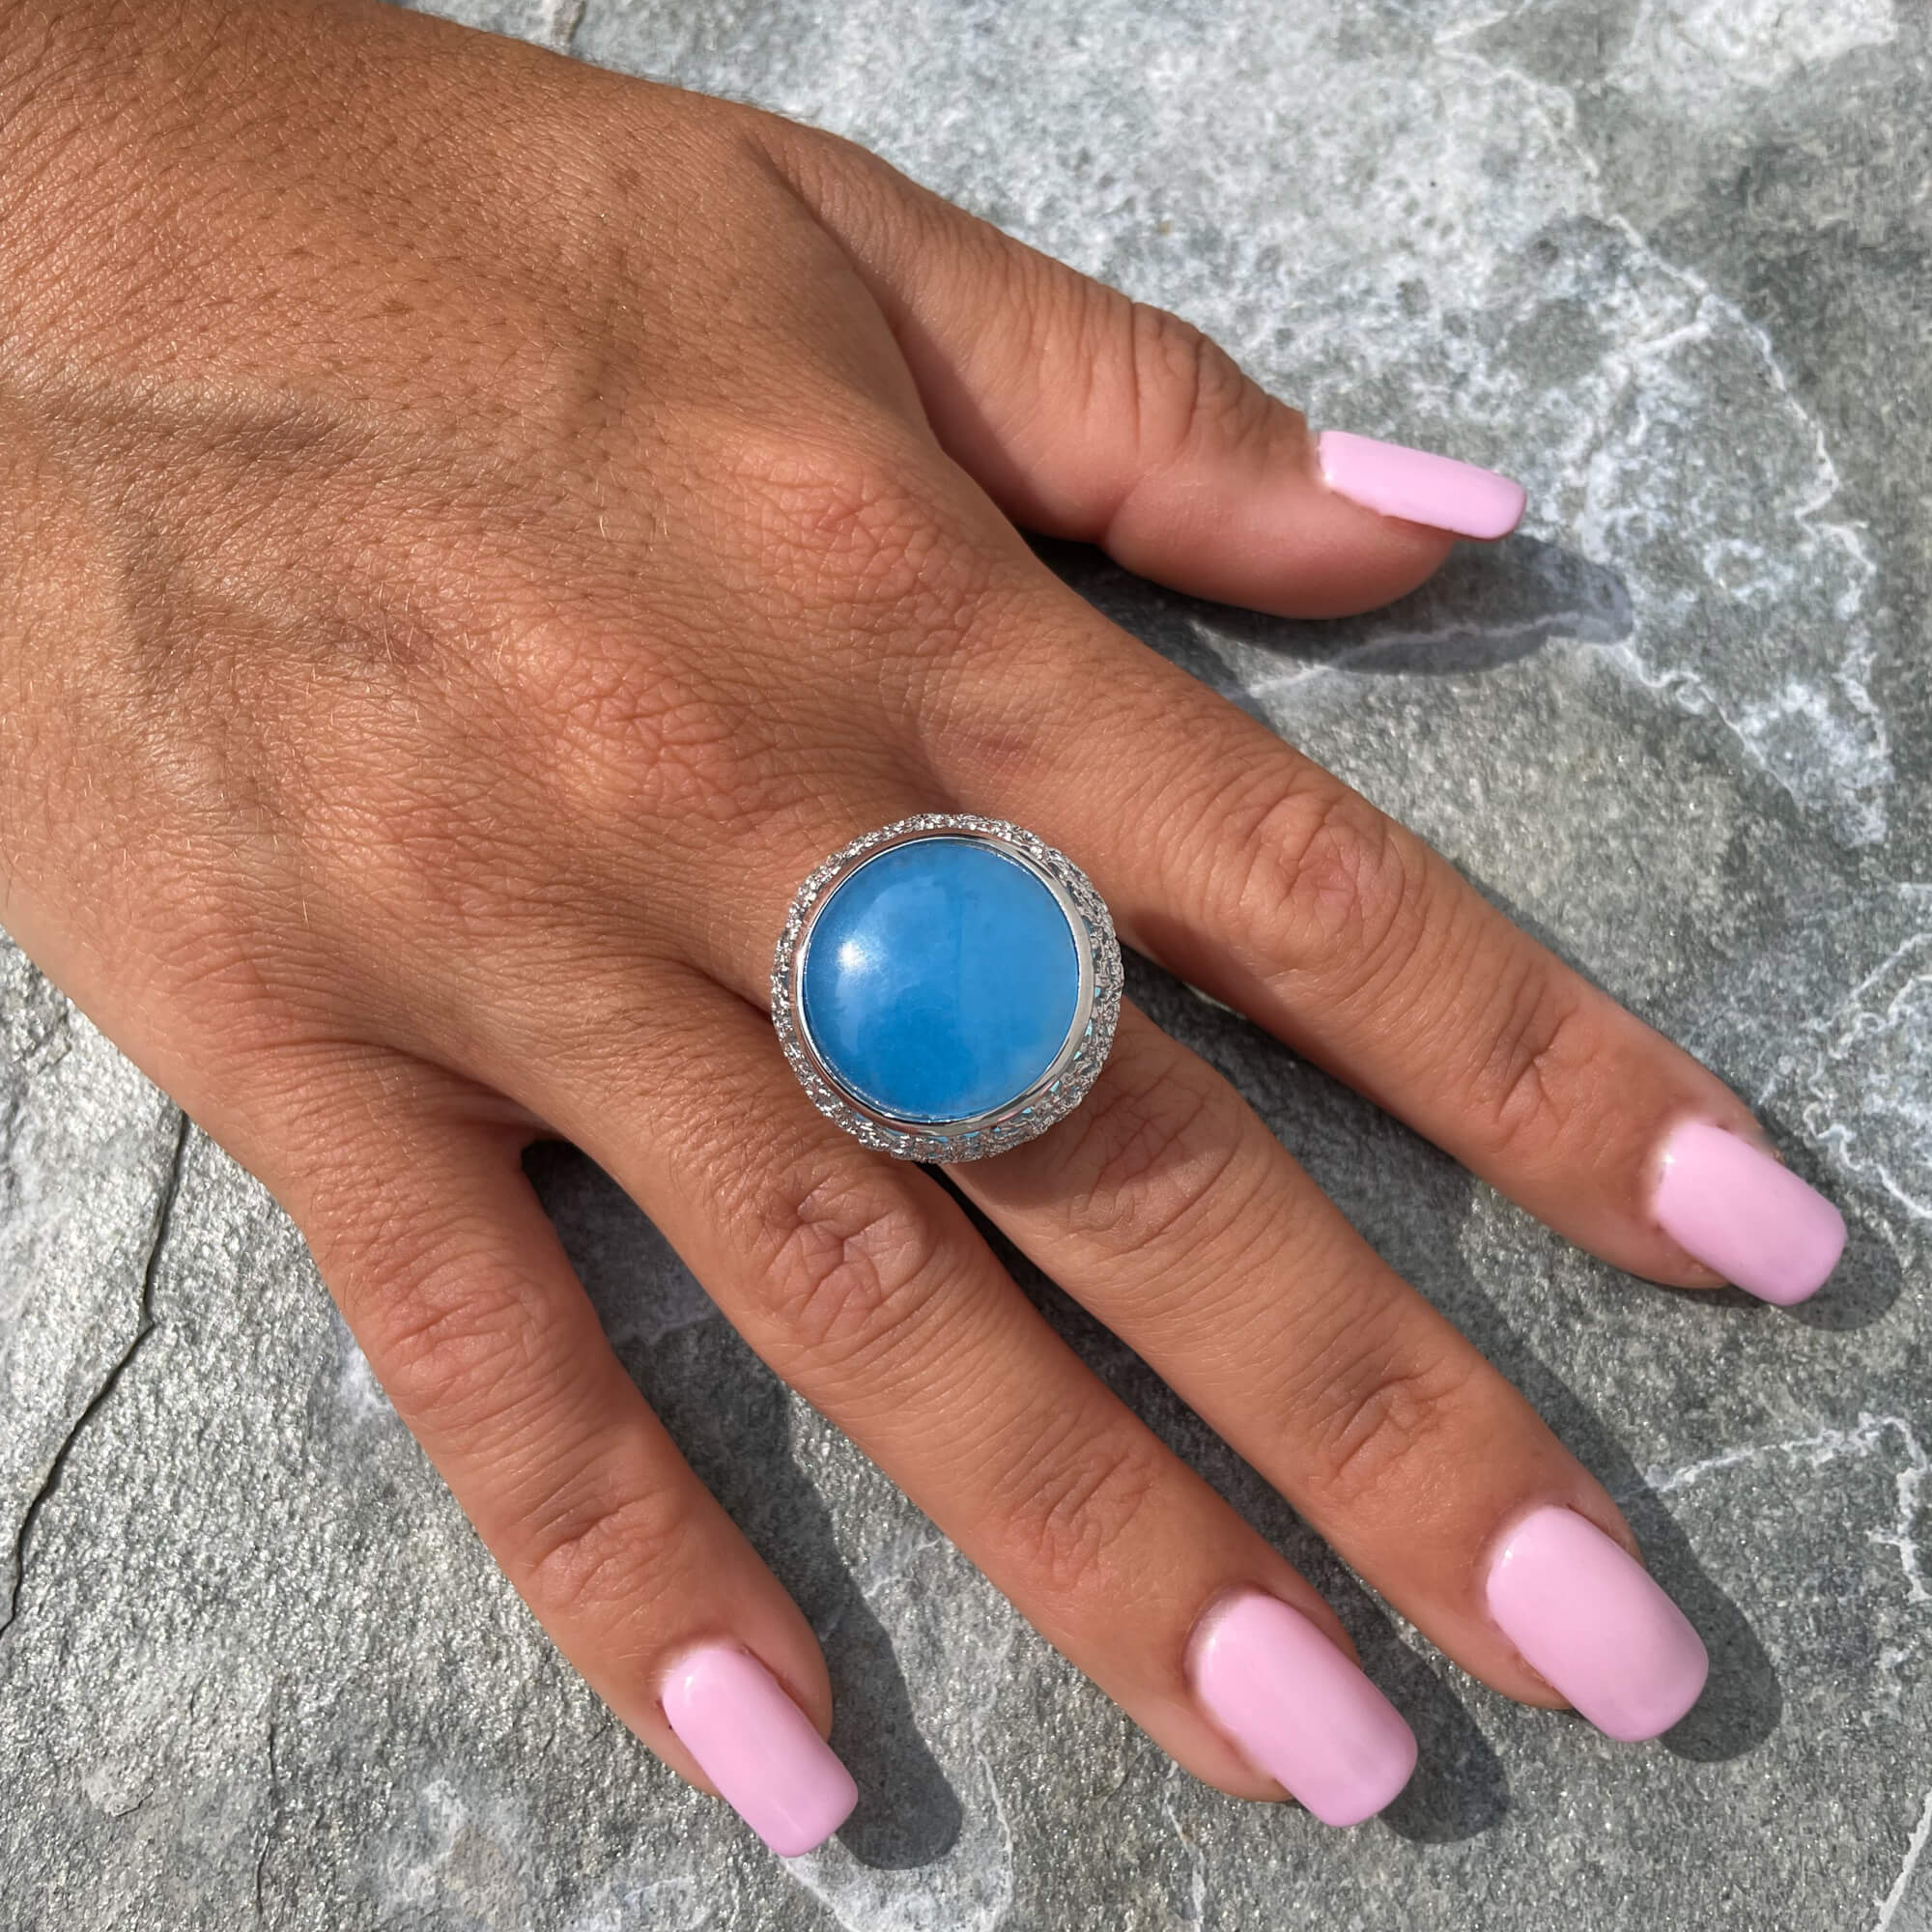 Edited silver ring with a blue quartz stone